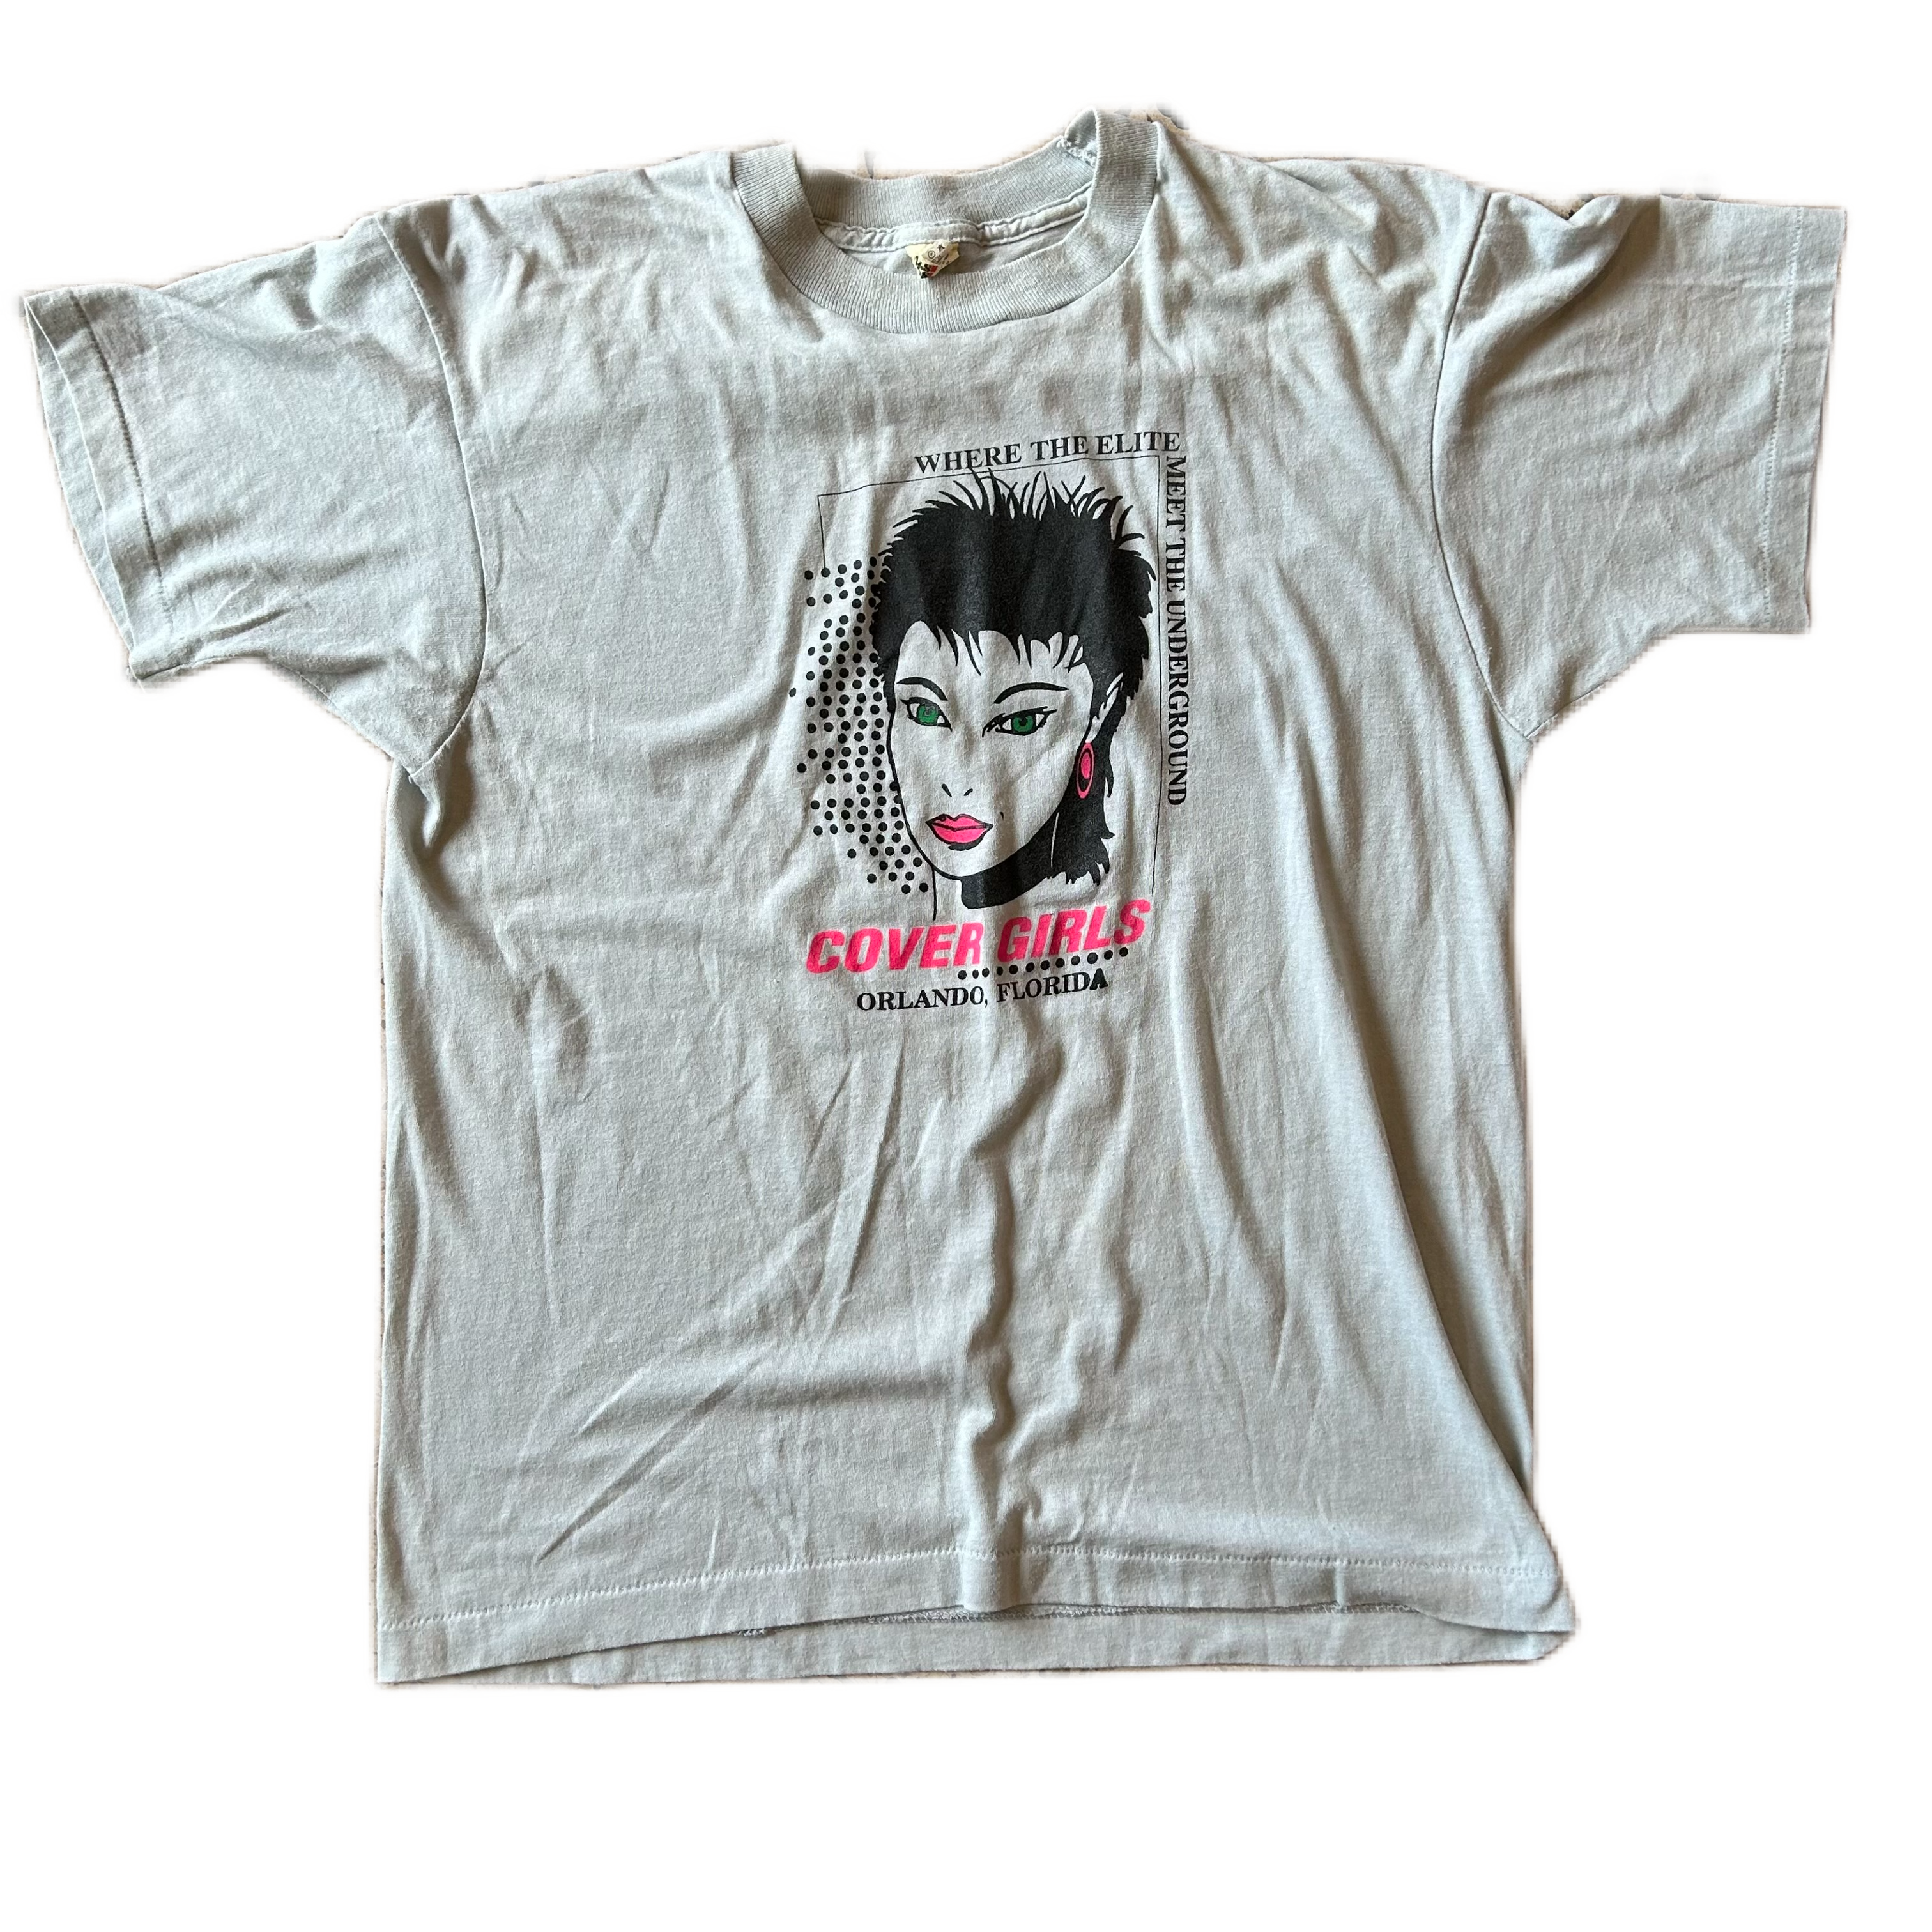 Vintage 1980s Cover Girls Tee